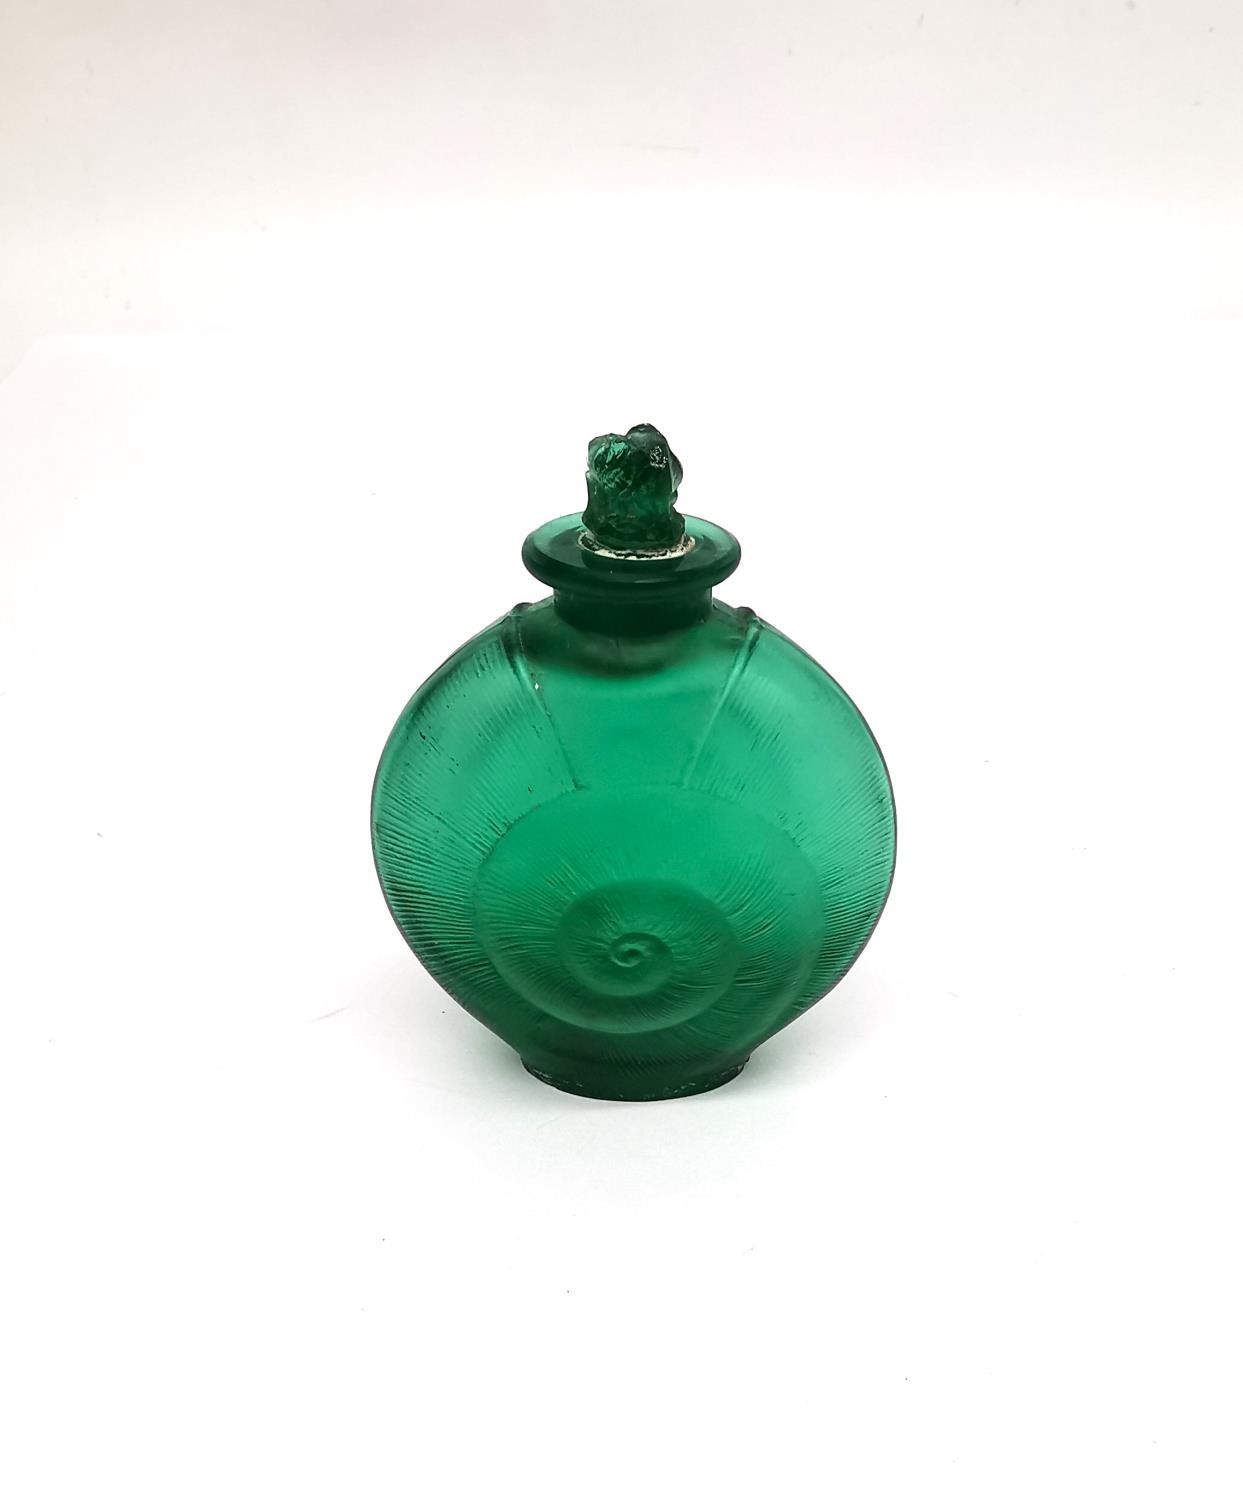 René Lalique (French 1860-1945) Amphitrite scent bottle, No.514 designed 1920 cased green, green - Image 2 of 8